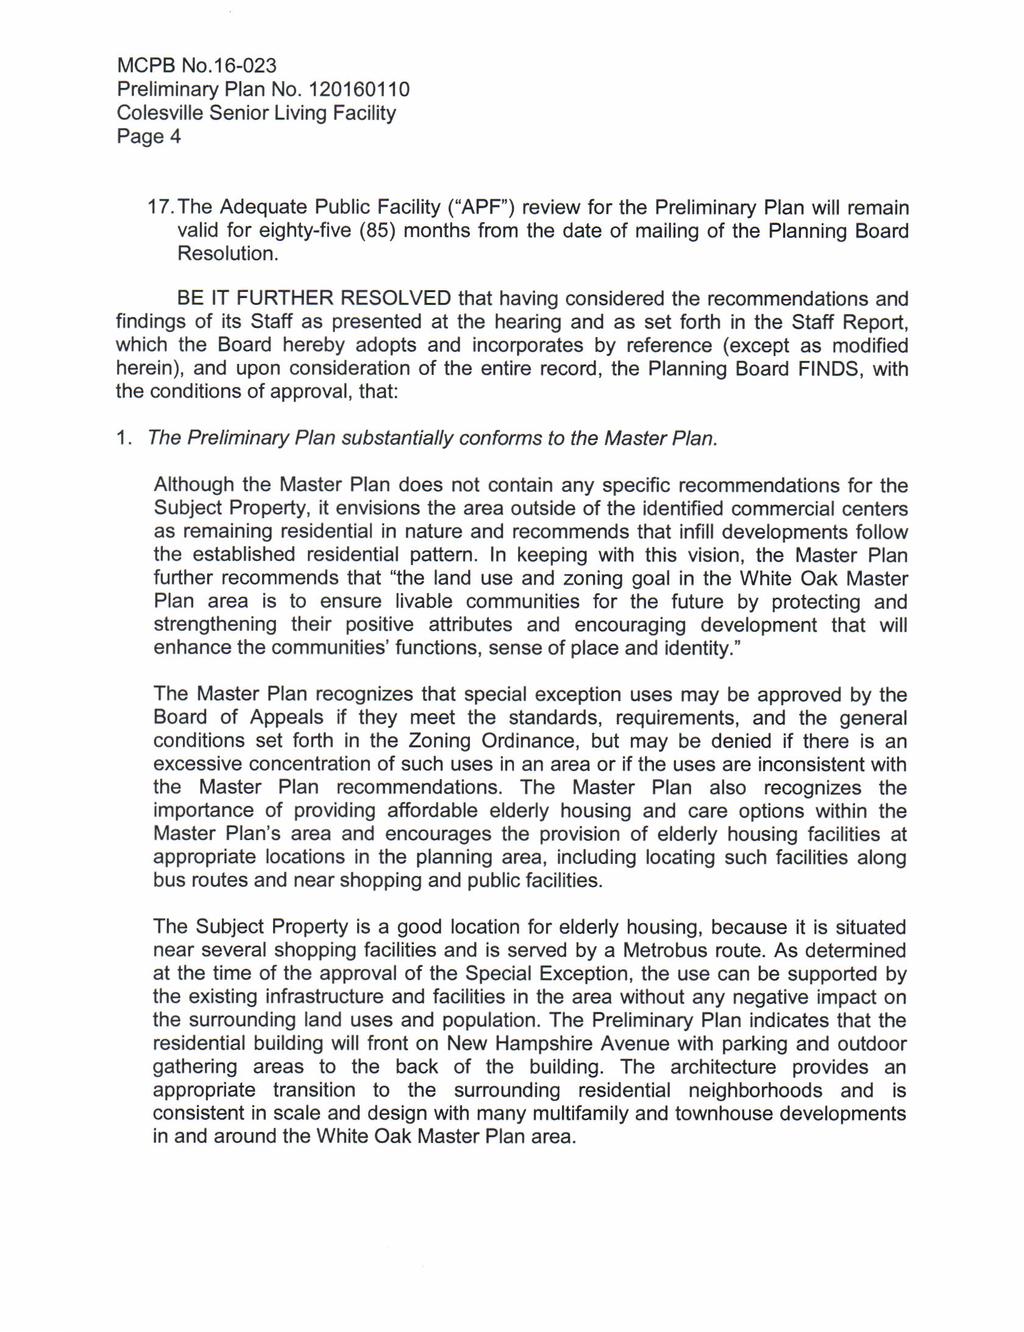 Page 4 17.The Adequate Public Facility ("APF") review for the Preliminary Plan will remain valid for eighty-five (85) months from the date of mailing of the Planning Board Resolution.